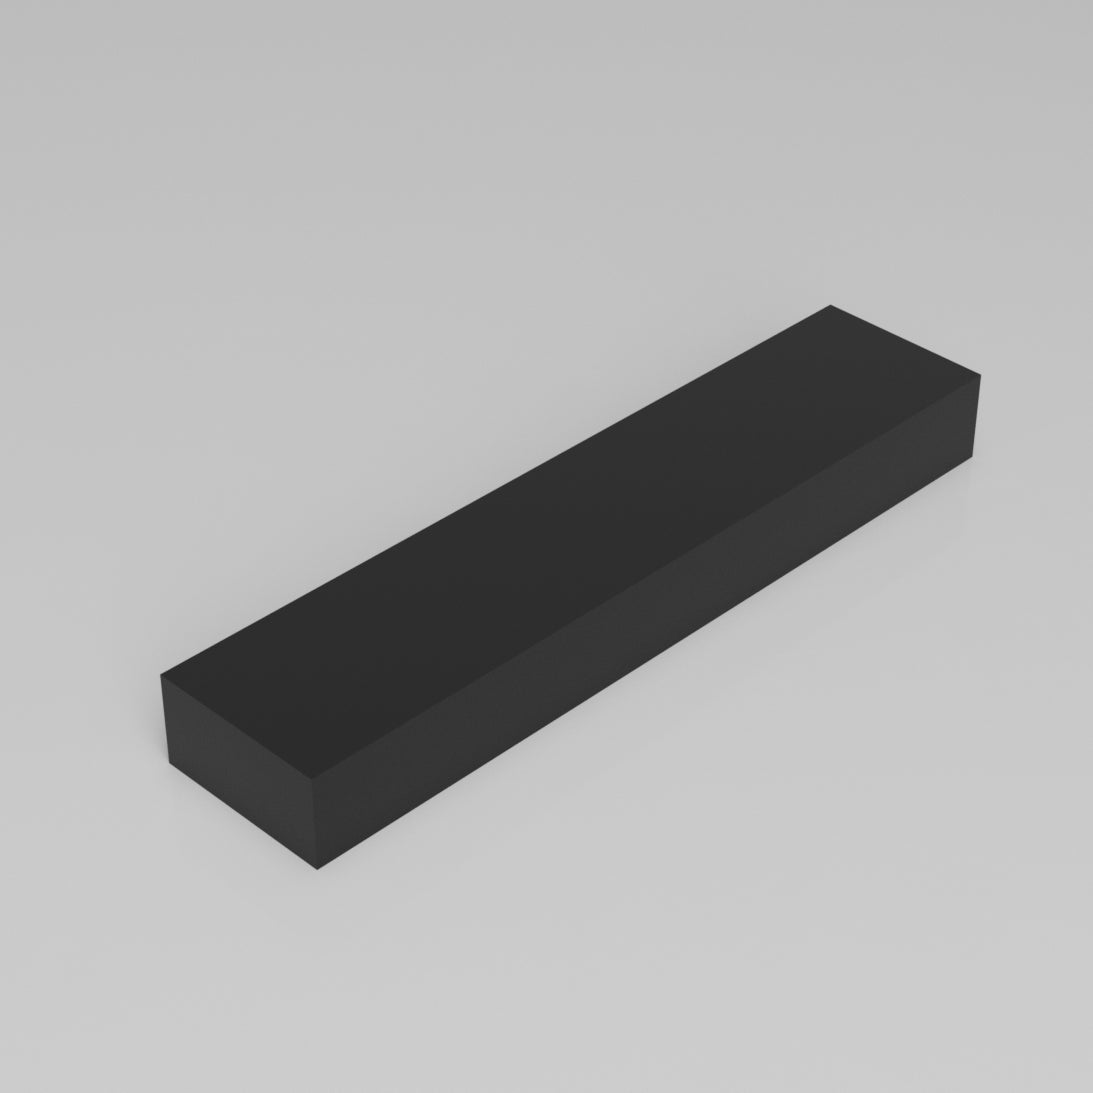 Machinable Wax Rectangular Block Front View 2 Inch by 4 Inch by 18 Inch